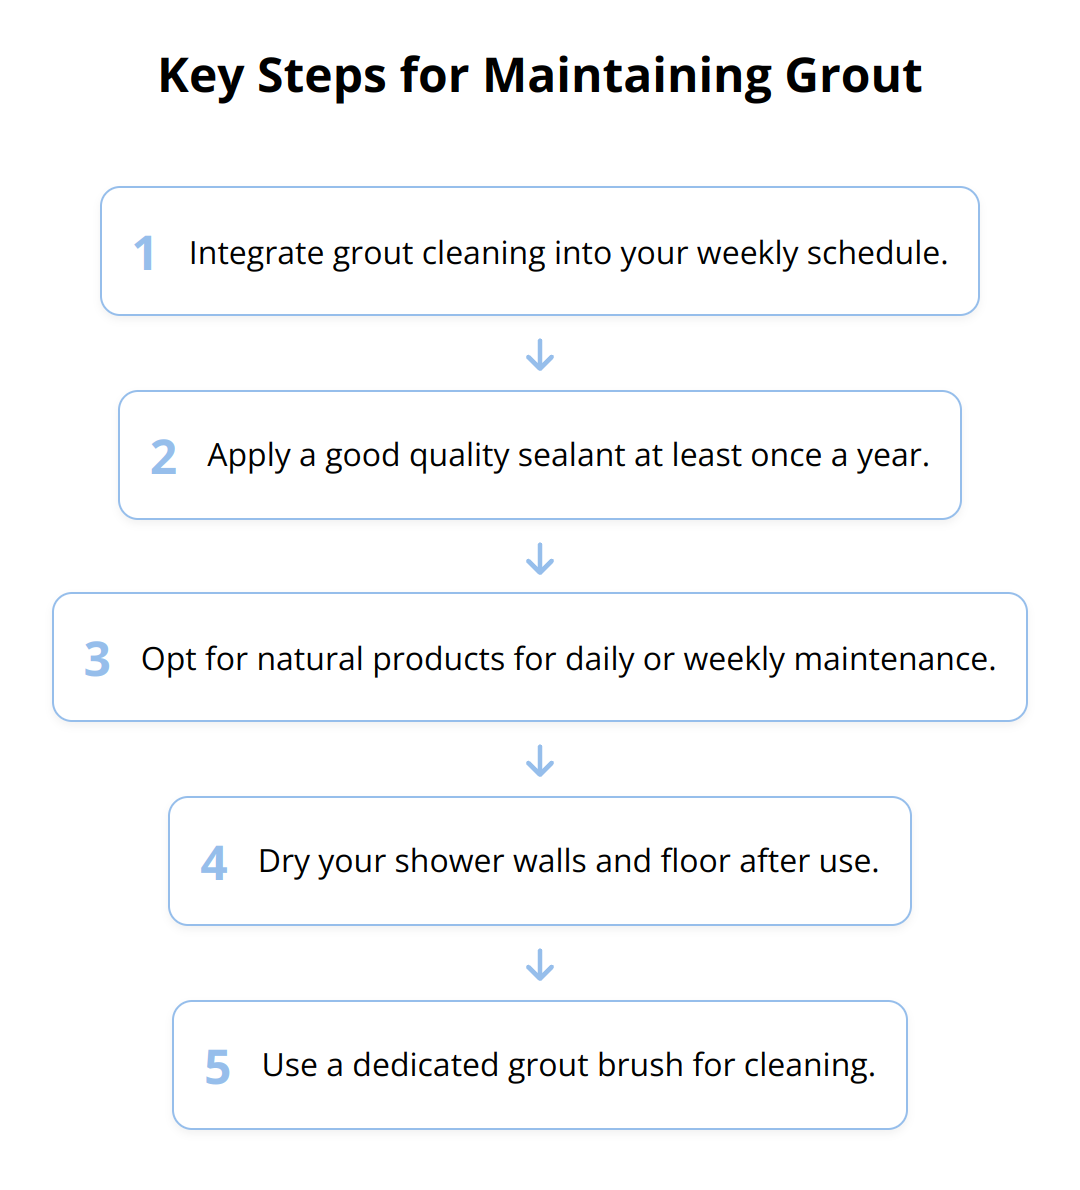 Flow Chart - Key Steps for Maintaining Grout